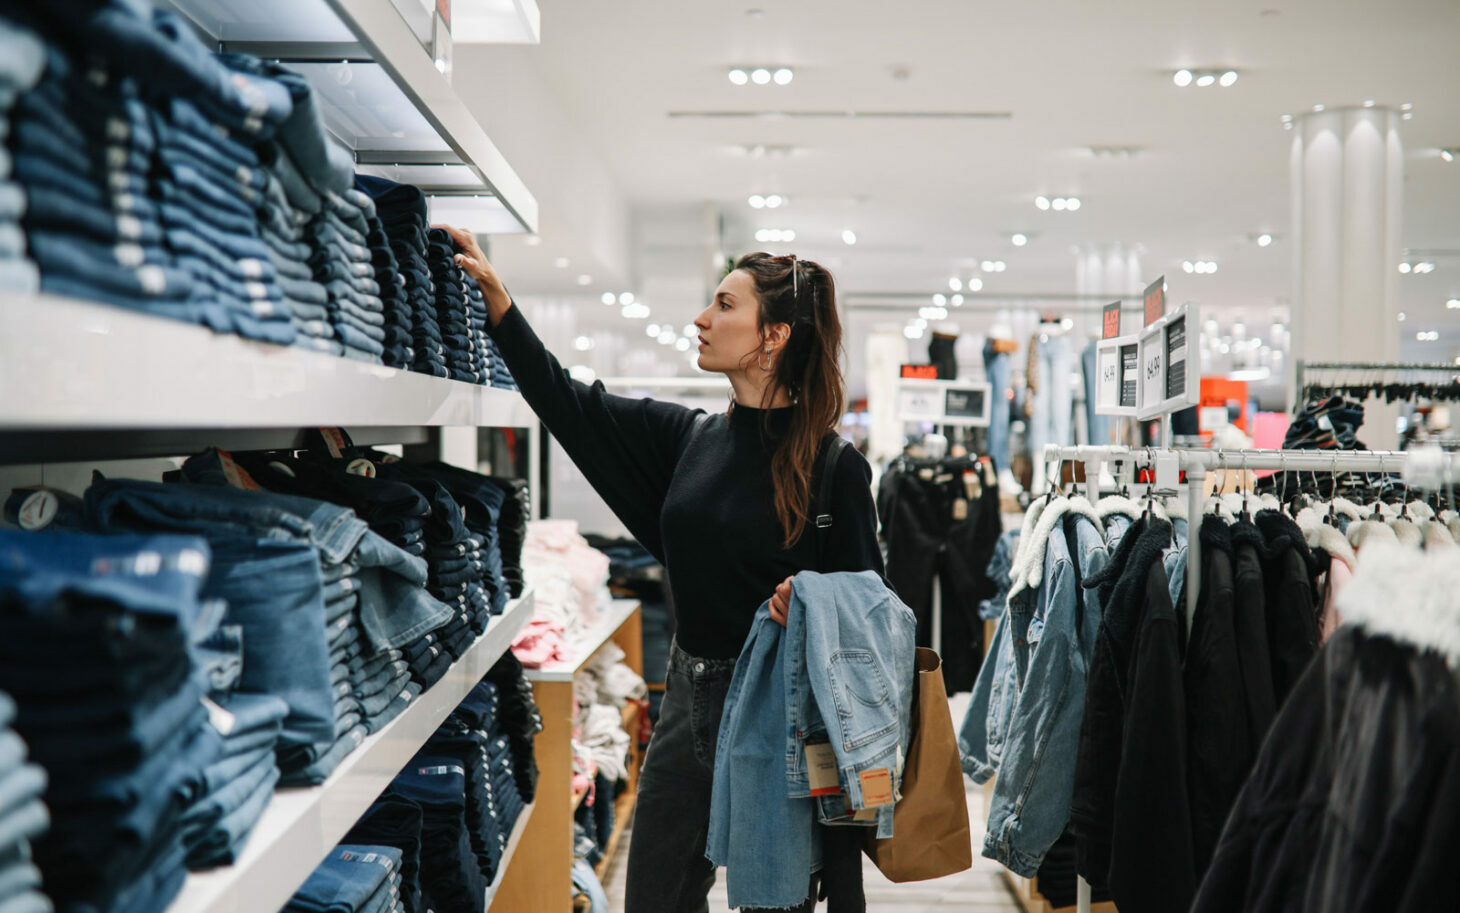 Fashion Retail: Strategies for Loyalty programs, Woman selects jeans in clothing store